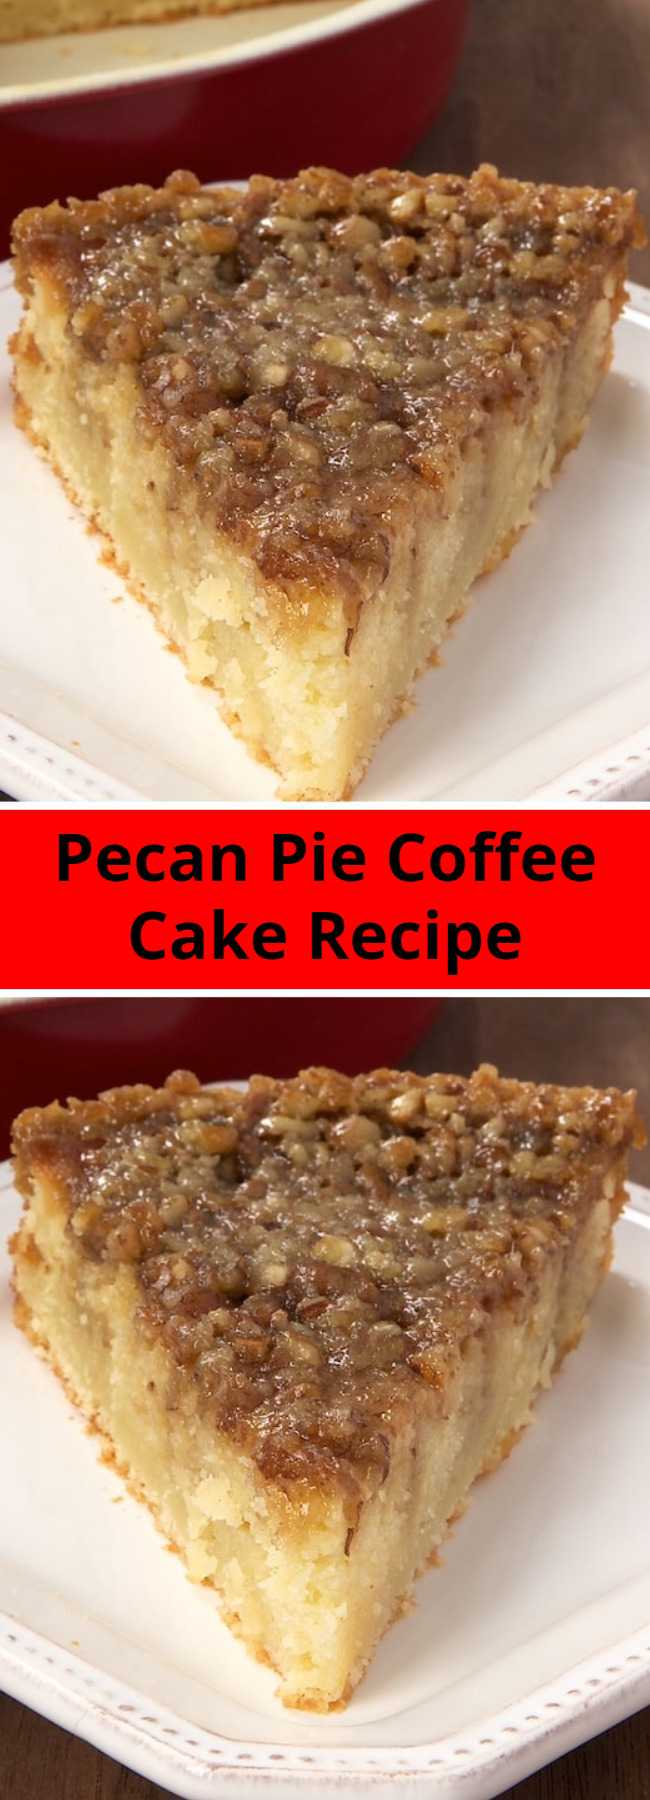 Pecan Pie Coffee Cake Recipe - Pecan Pie Coffee Cake is a delicious cake with a layer of pecan pie filling right on top!